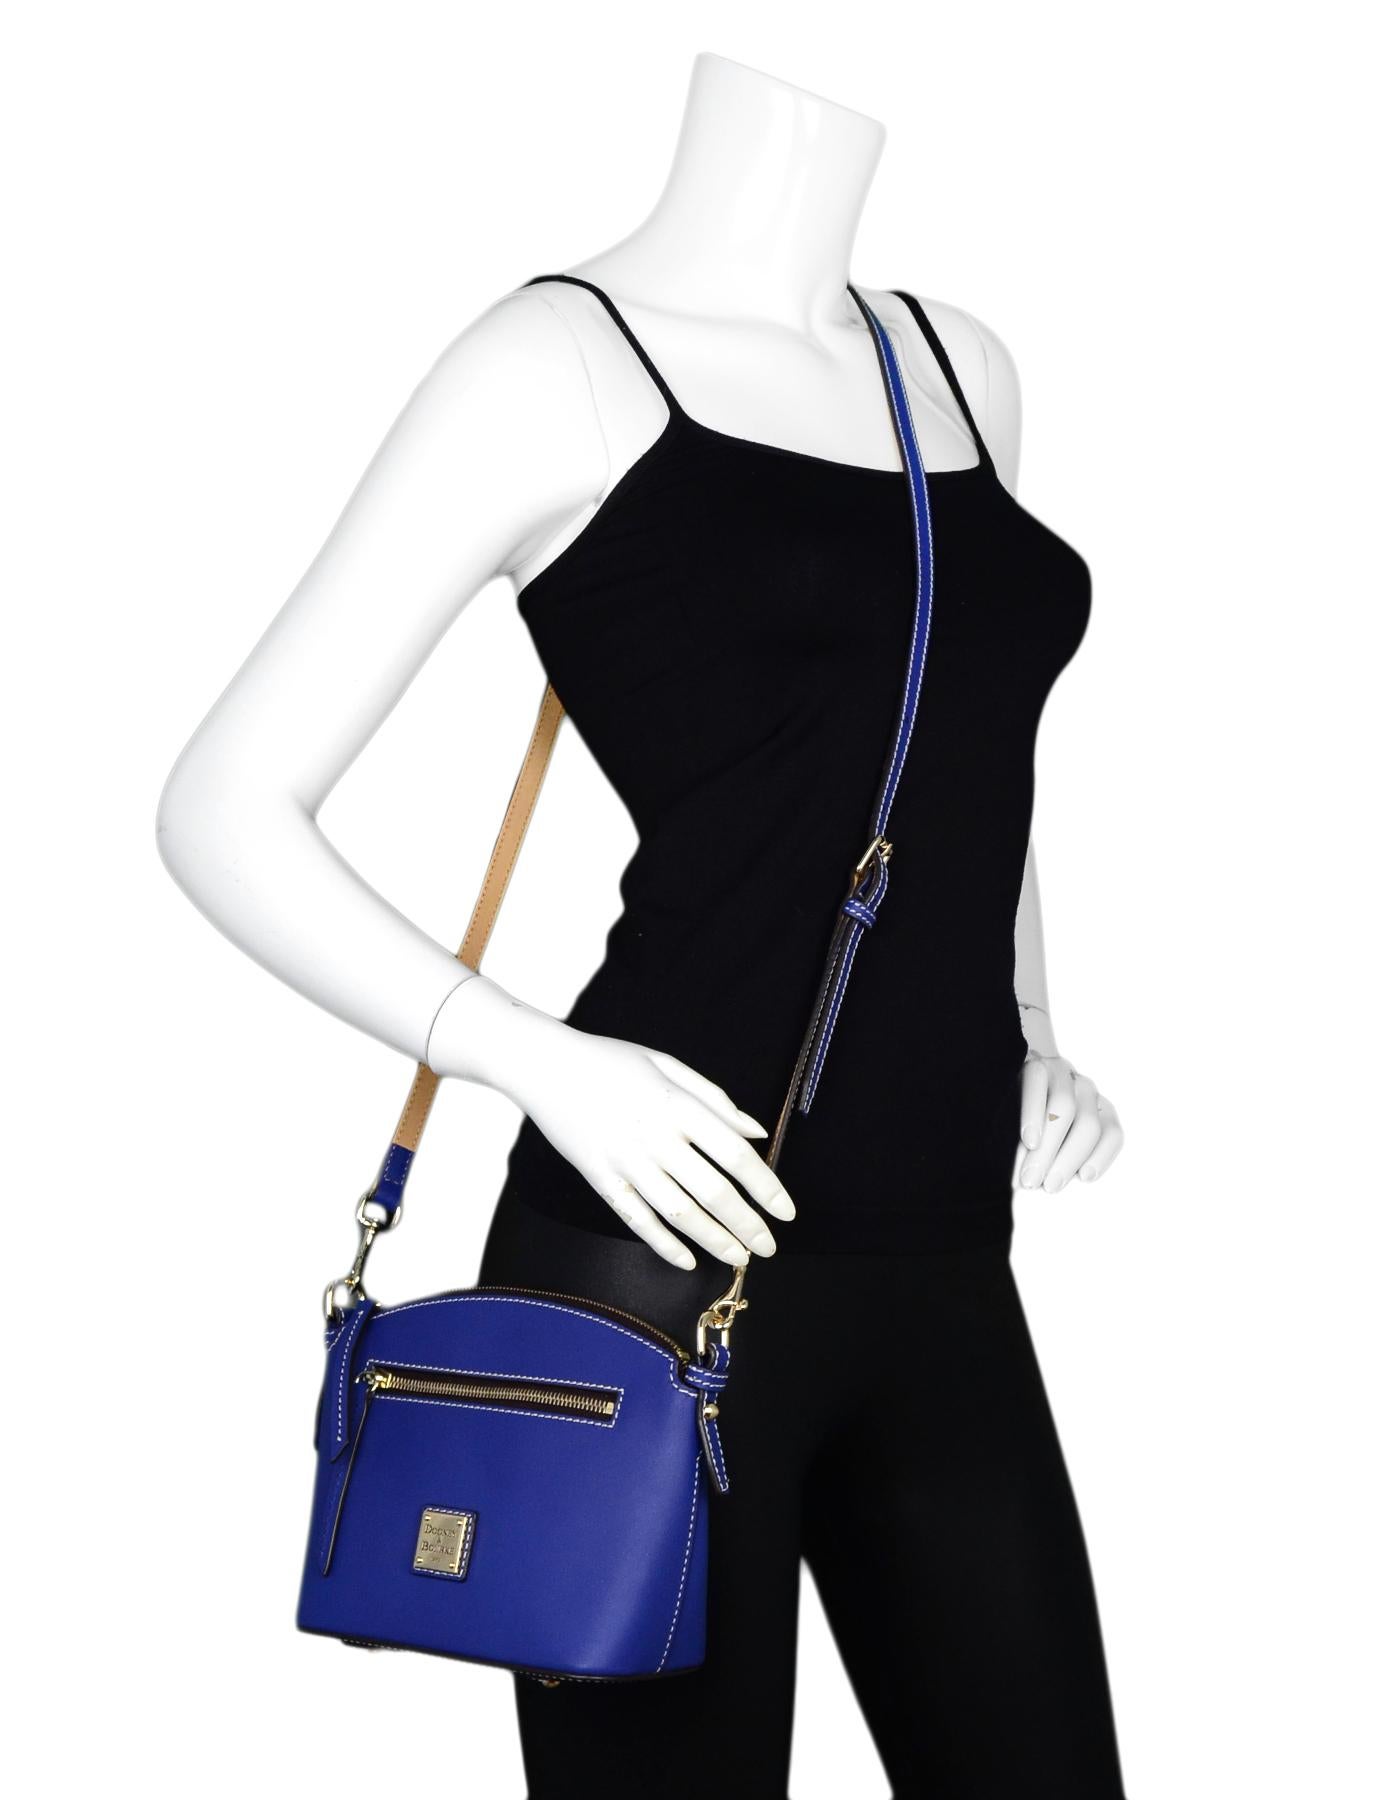 Dooney & Bourke French Blue Leather Domed Crossbody Bag

Color: French blue
Hardware: Goldtone
Materials: Leather, metal
Lining: Blue/white striped canvas
Closure/Opening: Zip top
Exterior Pockets: One front facing pocket
Interior Pockets: Two open